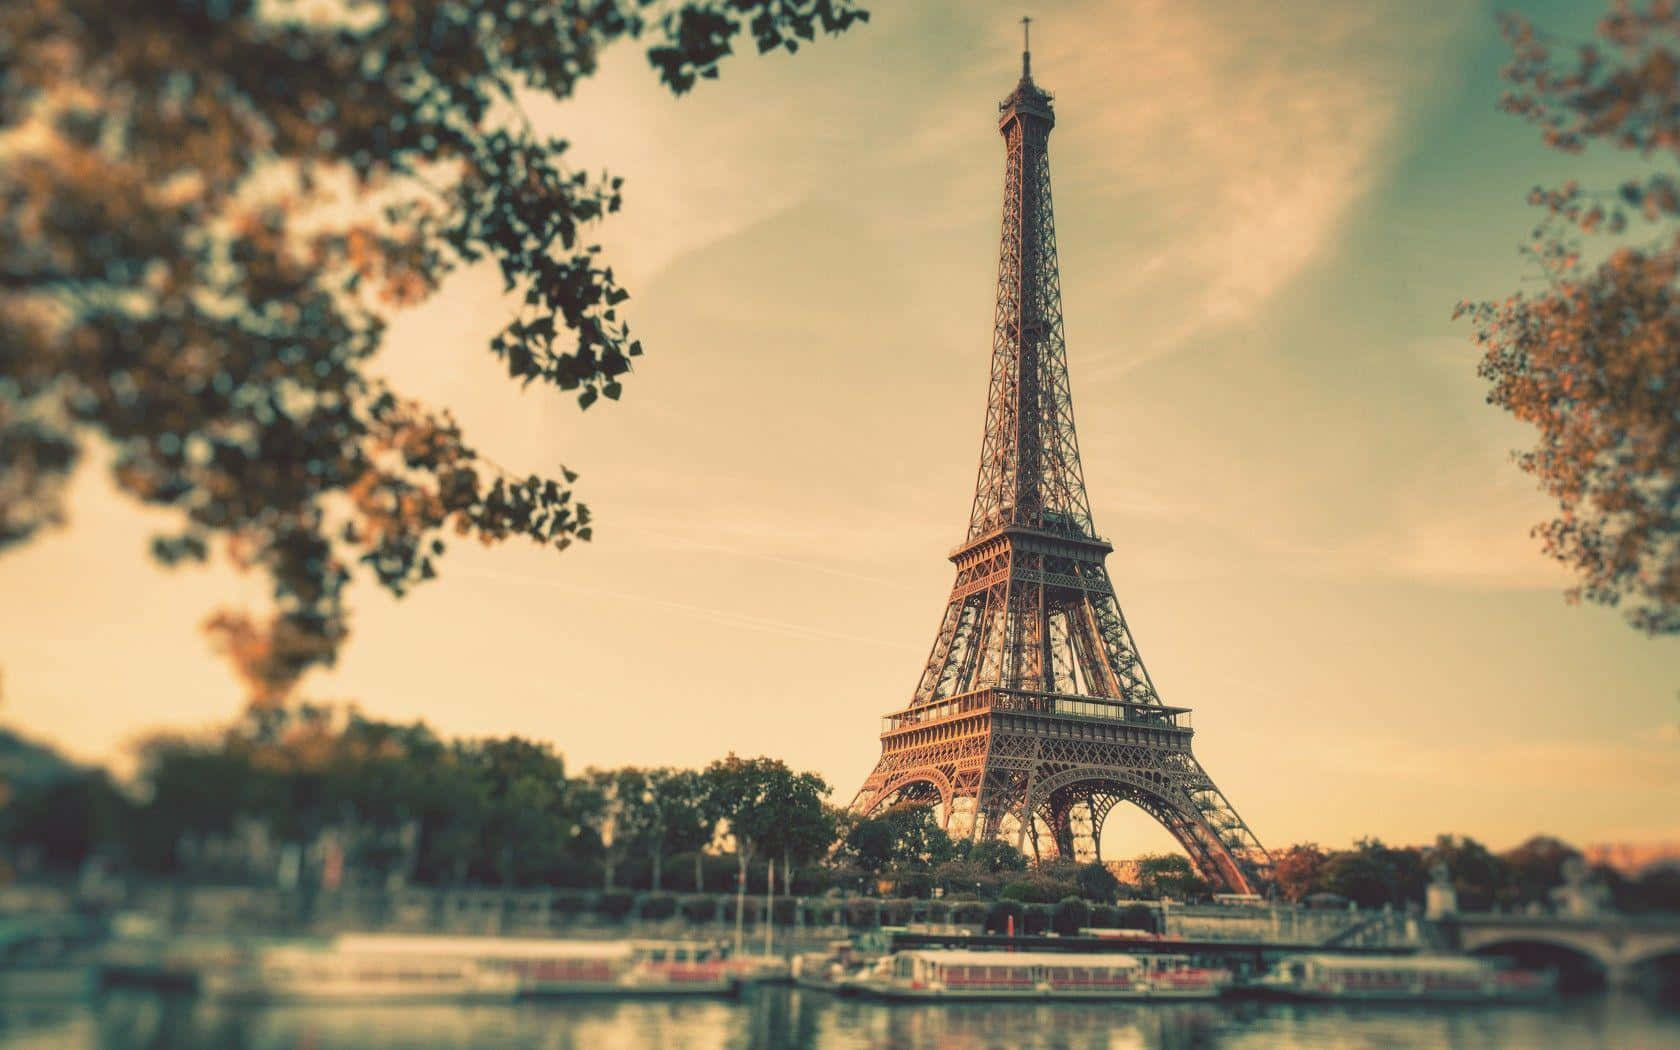 The Eiffel Tower, a symbol of French heritage